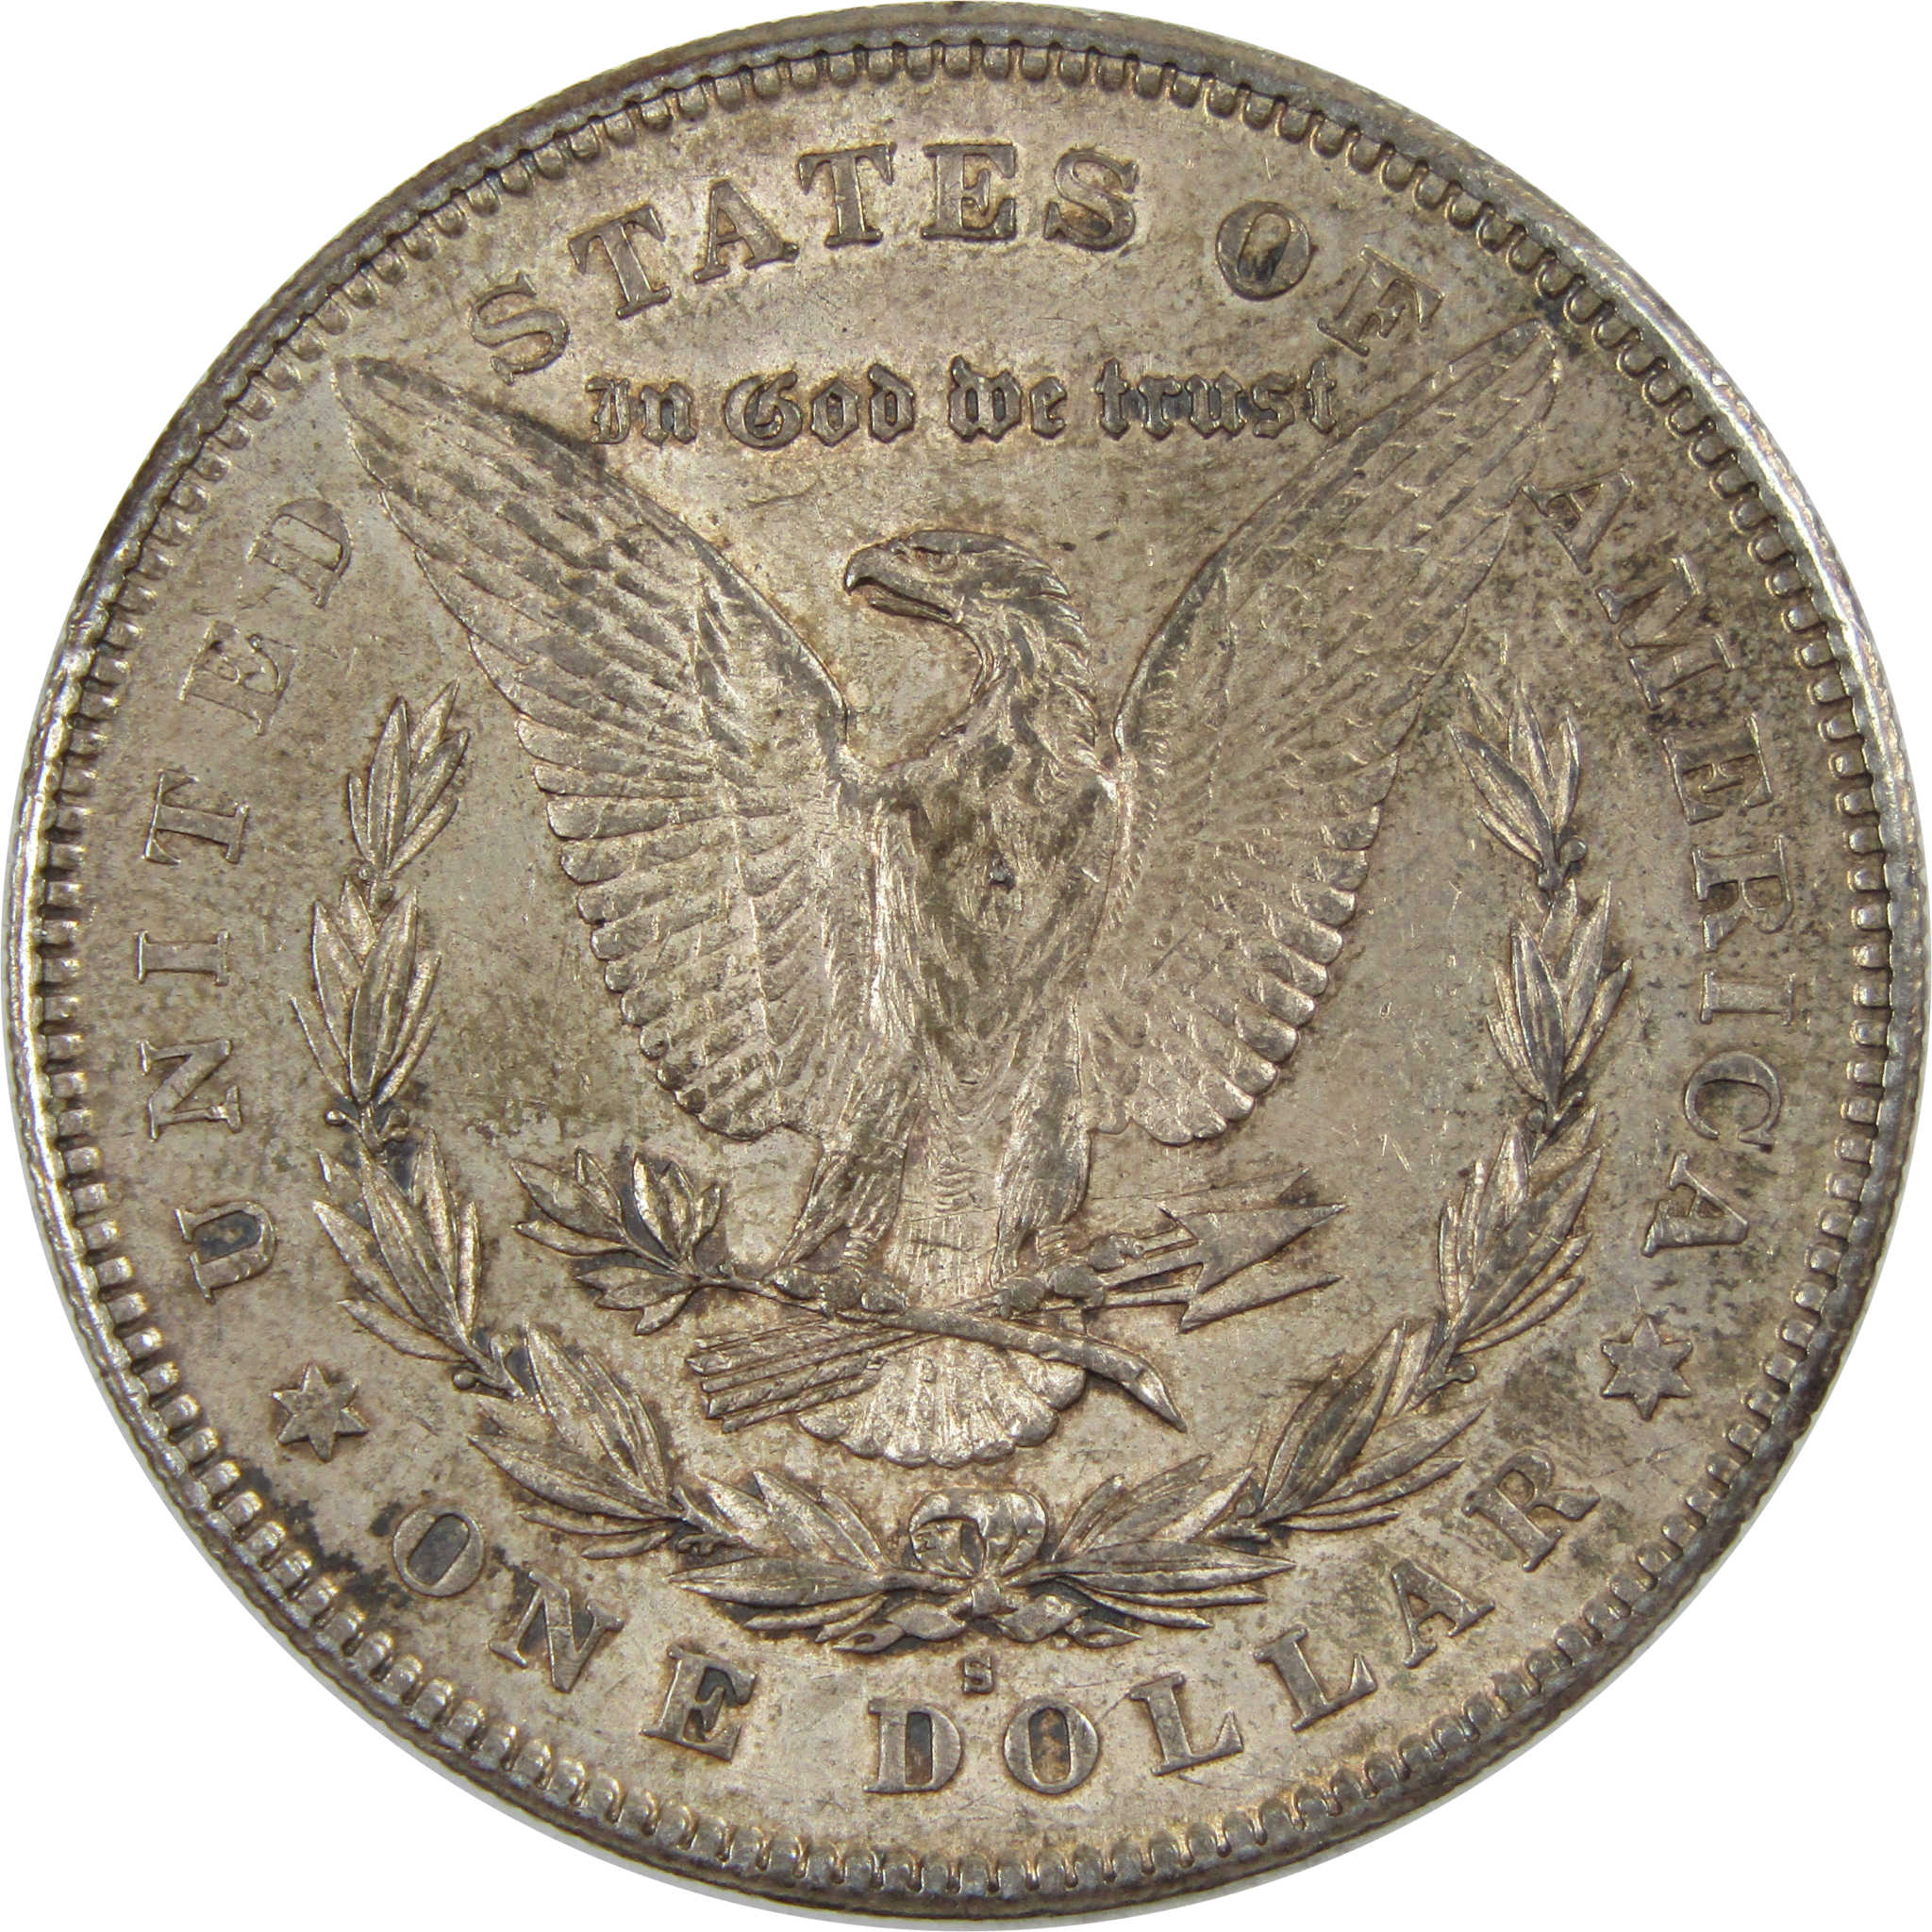 1878 S Morgan Dollar XF EF Extremely Fine 90% Silver $1 Coin SKU:I7018 - Morgan coin - Morgan silver dollar - Morgan silver dollar for sale - Profile Coins &amp; Collectibles